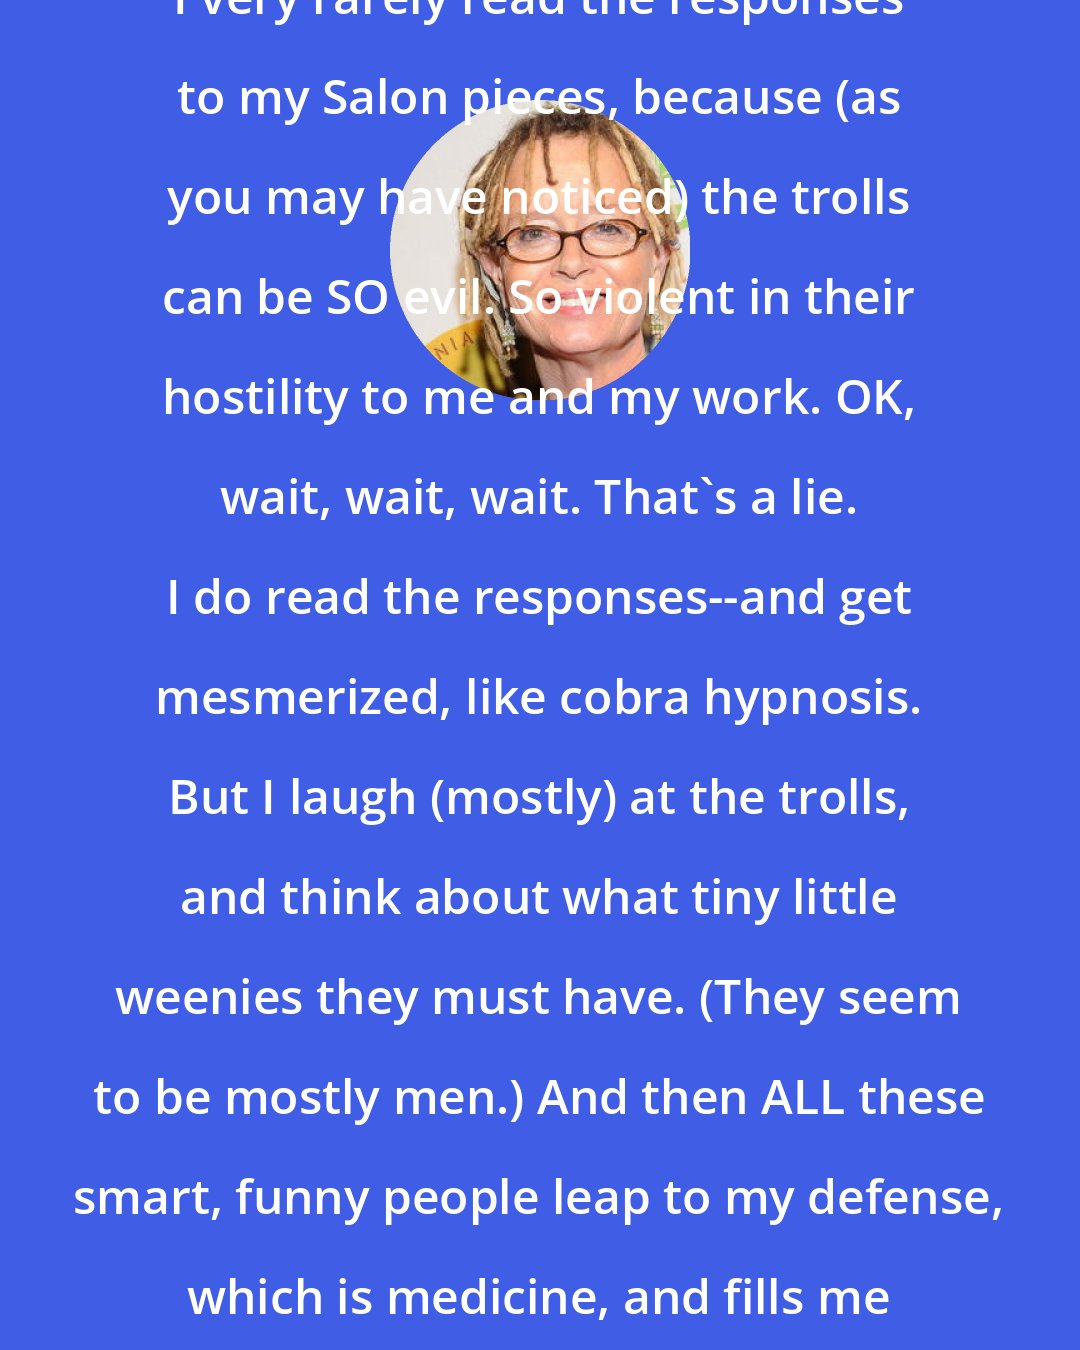 Anne Lamott: I very rarely read the responses to my Salon pieces, because (as you may have noticed) the trolls can be SO evil. So violent in their hostility to me and my work. OK, wait, wait, wait. That's a lie. I do read the responses--and get mesmerized, like cobra hypnosis. But I laugh (mostly) at the trolls, and think about what tiny little weenies they must have. (They seem to be mostly men.) And then ALL these smart, funny people leap to my defense, which is medicine, and fills me with love and thankfulness.